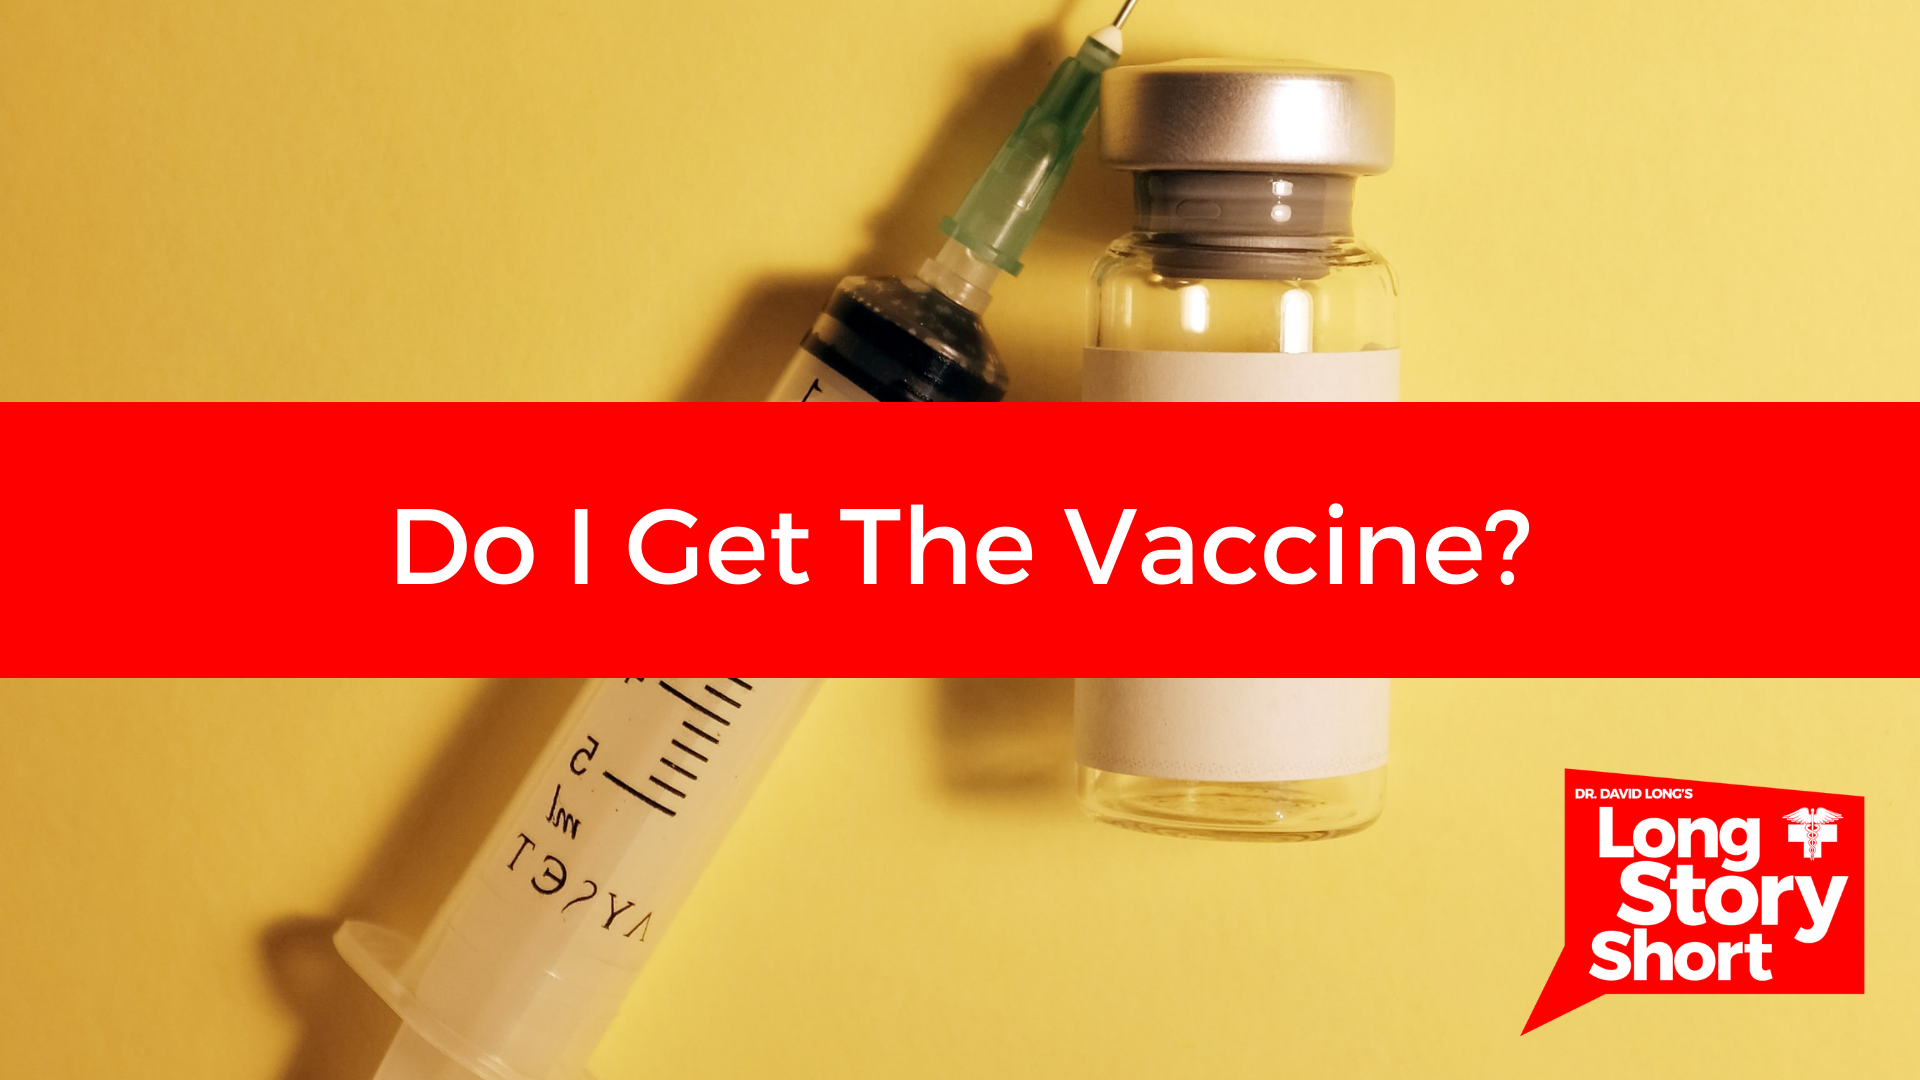 You are currently viewing Do I Get the Vaccine? – Dr. David Long